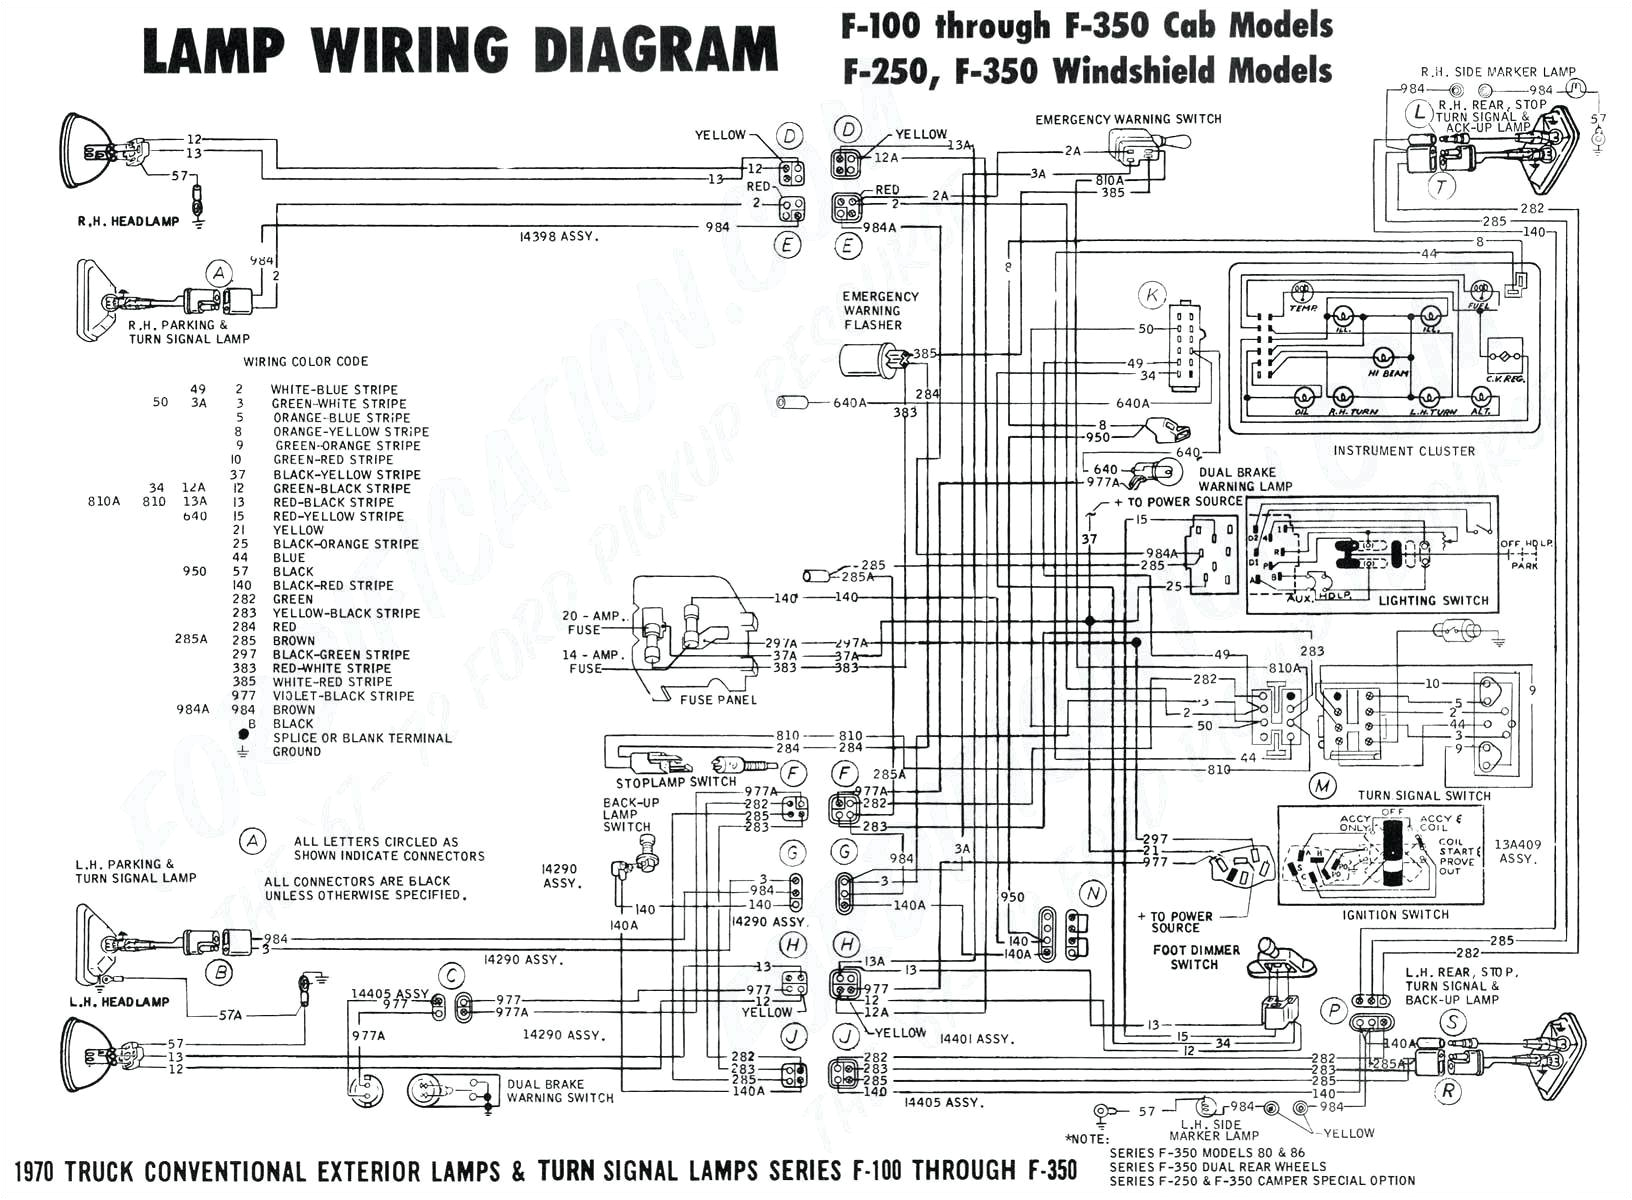 electrical switch wiring diagram free download premium wiring low voltage switch wiring diagram free download